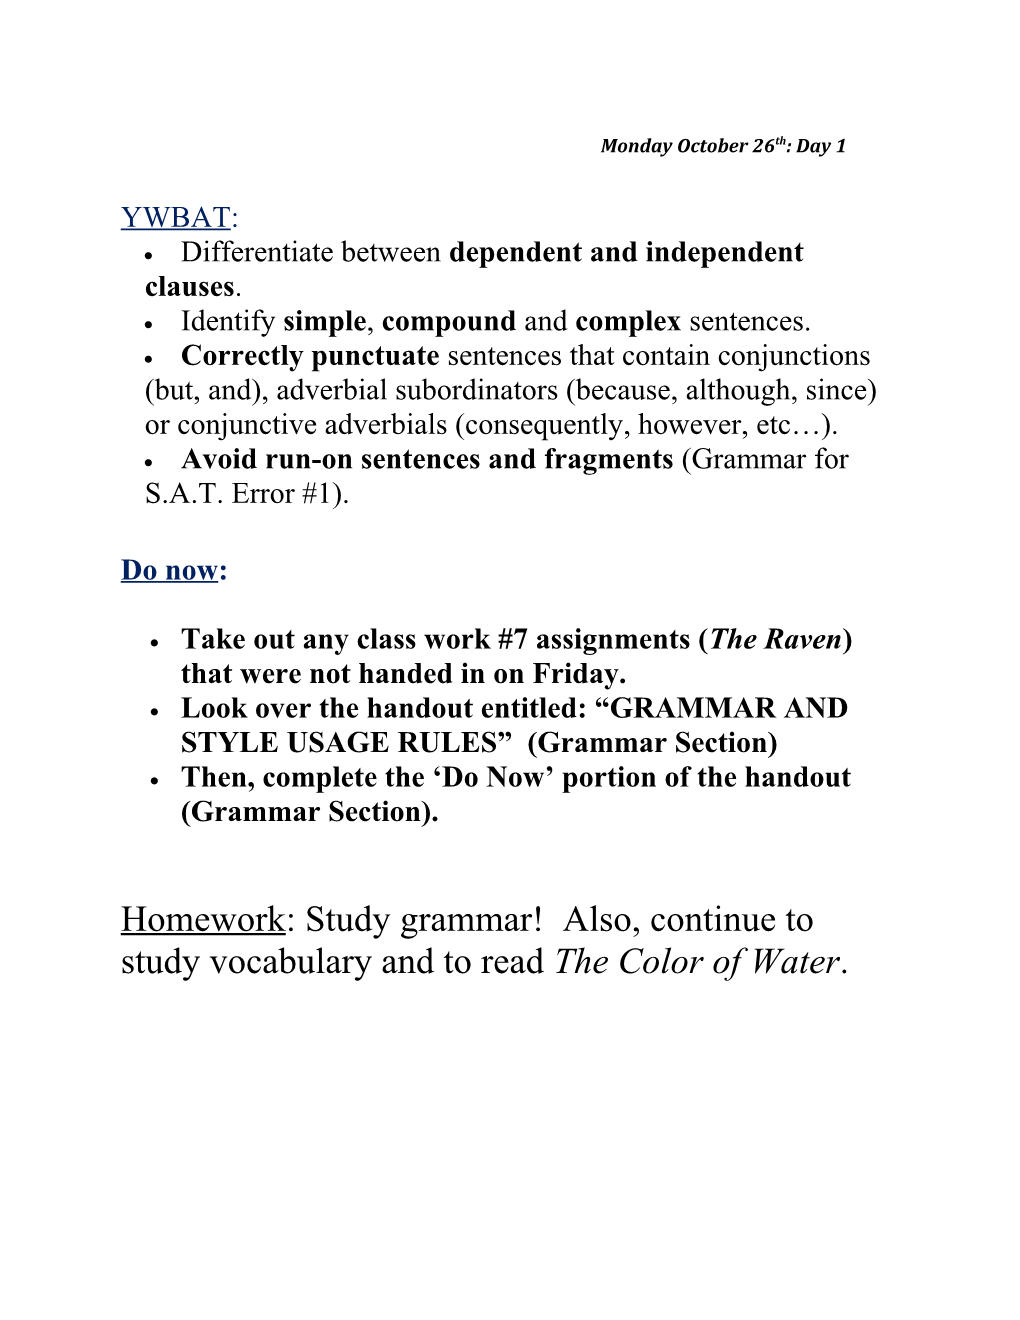 Differentiate Between Dependent and Independent Clauses